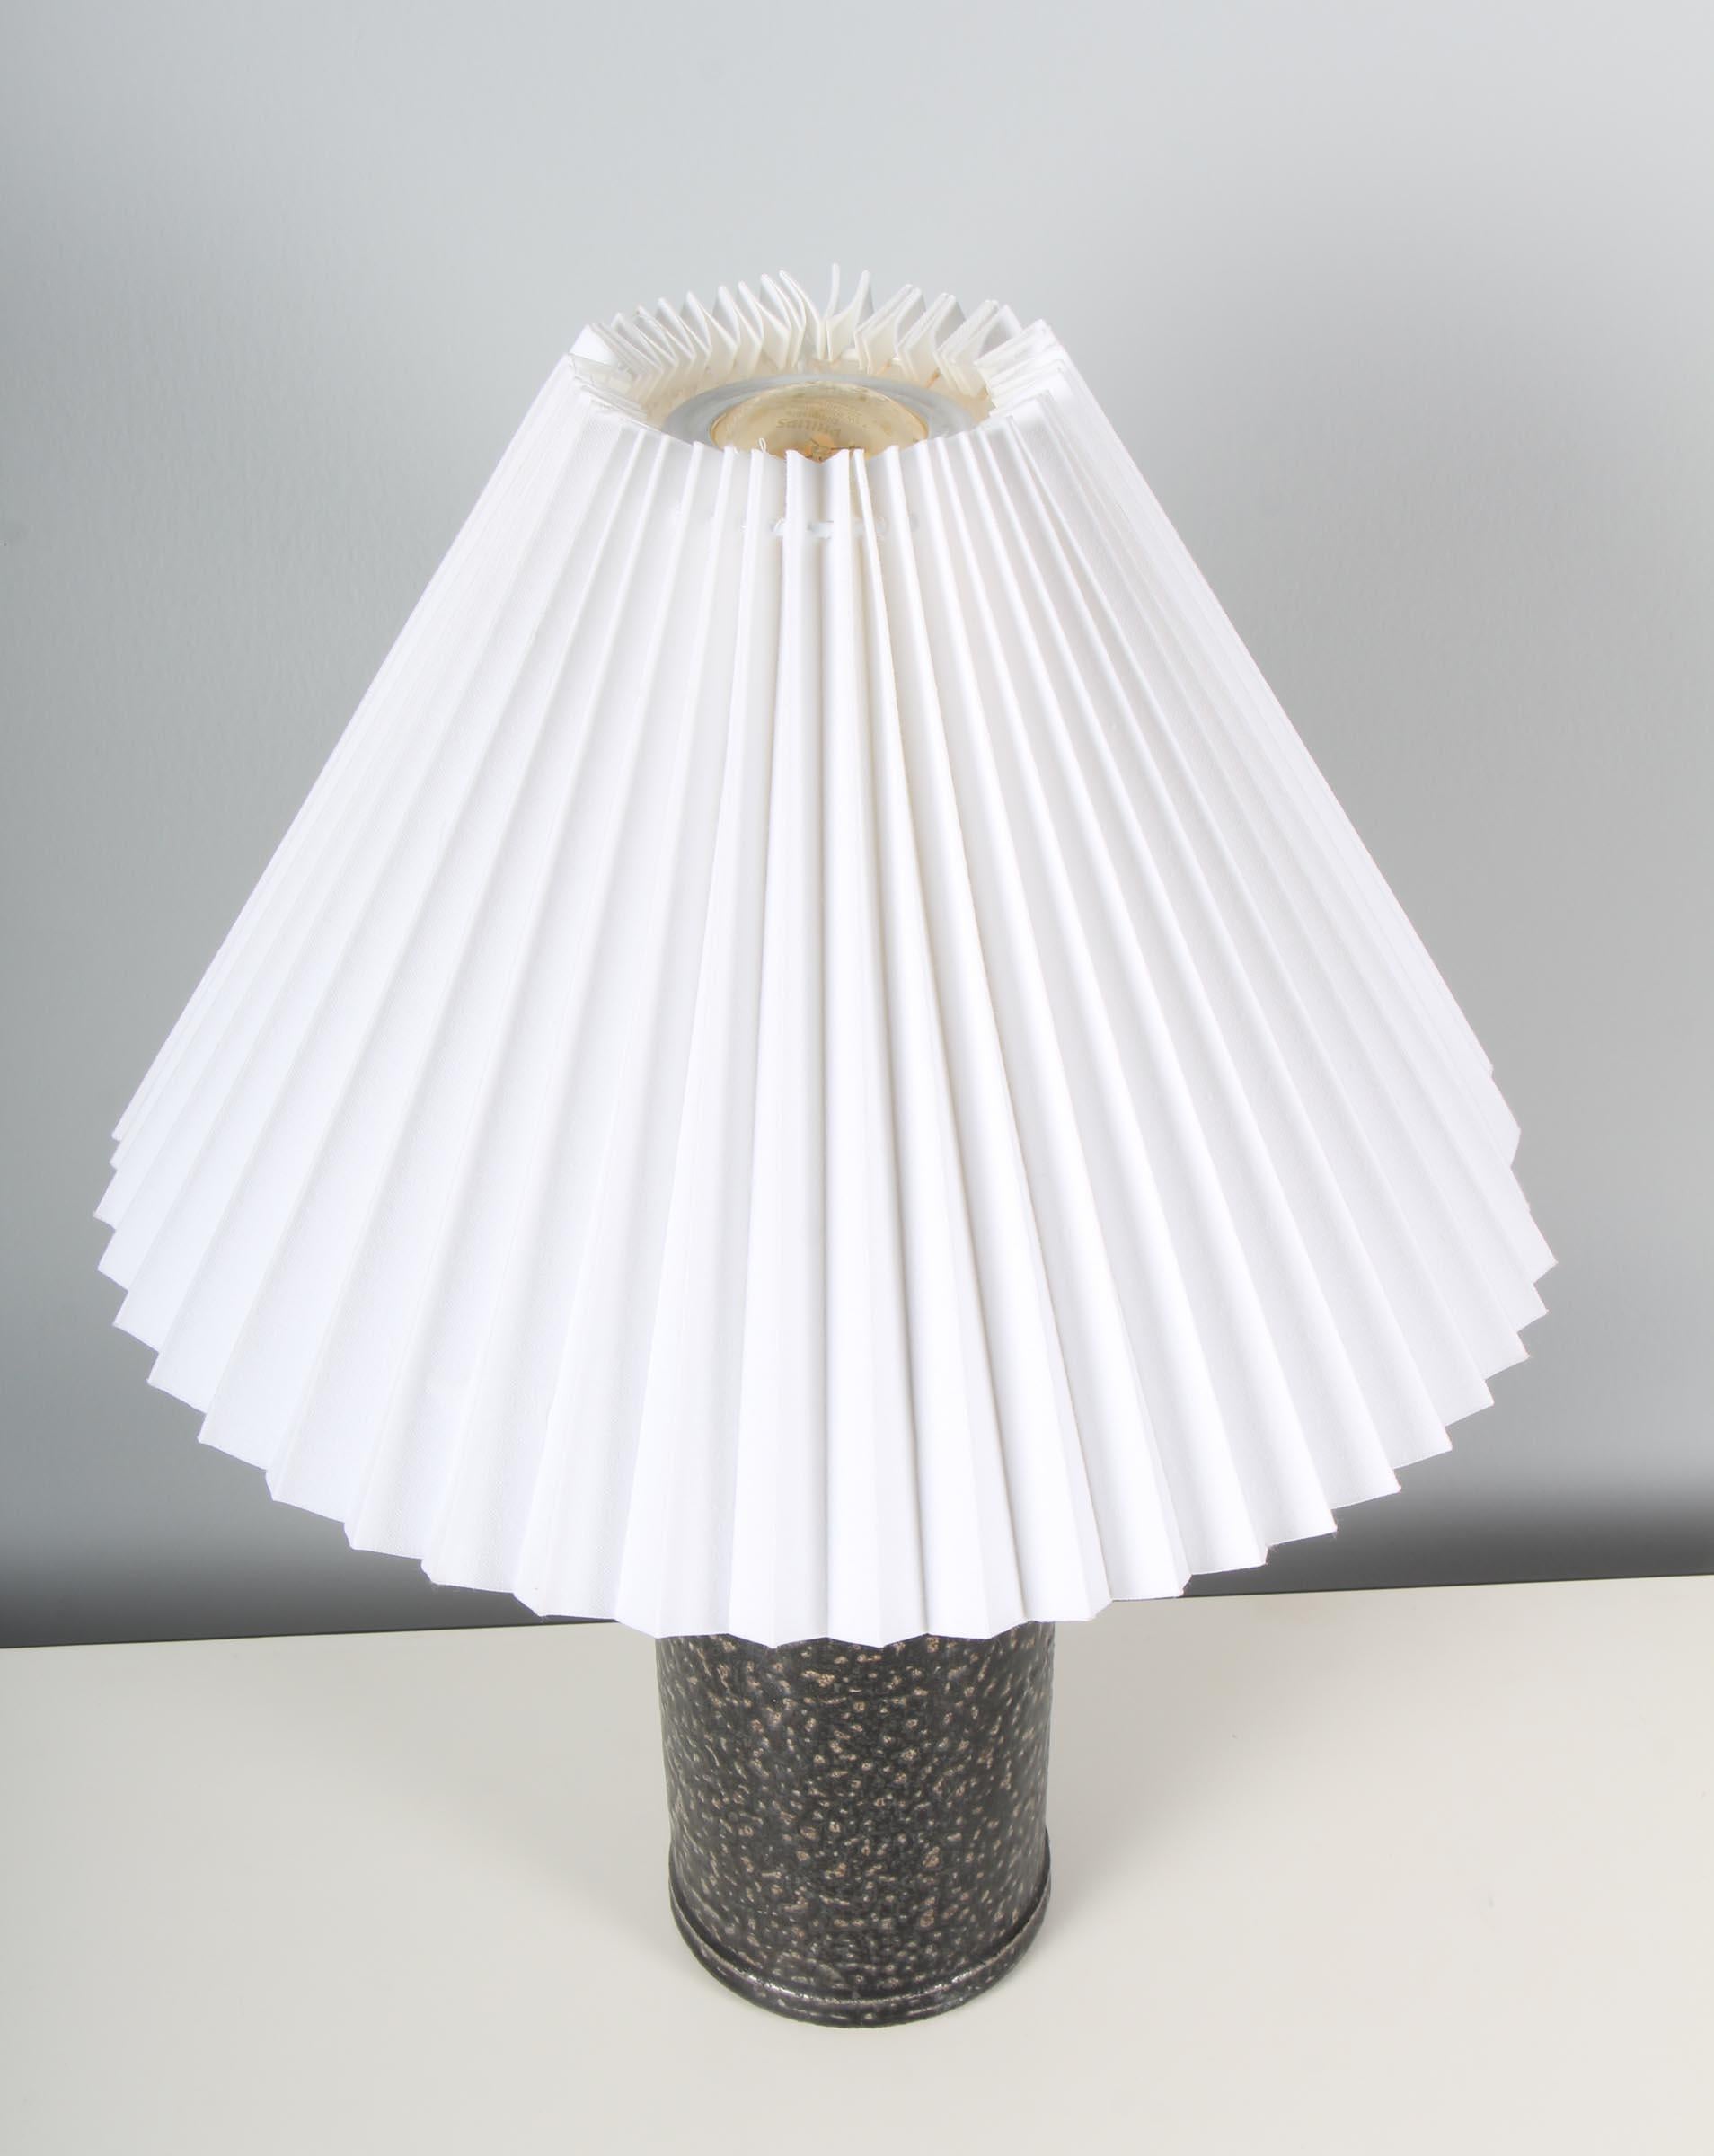 Herman A. Kähler table lamp in partly glazed ceramic.

 